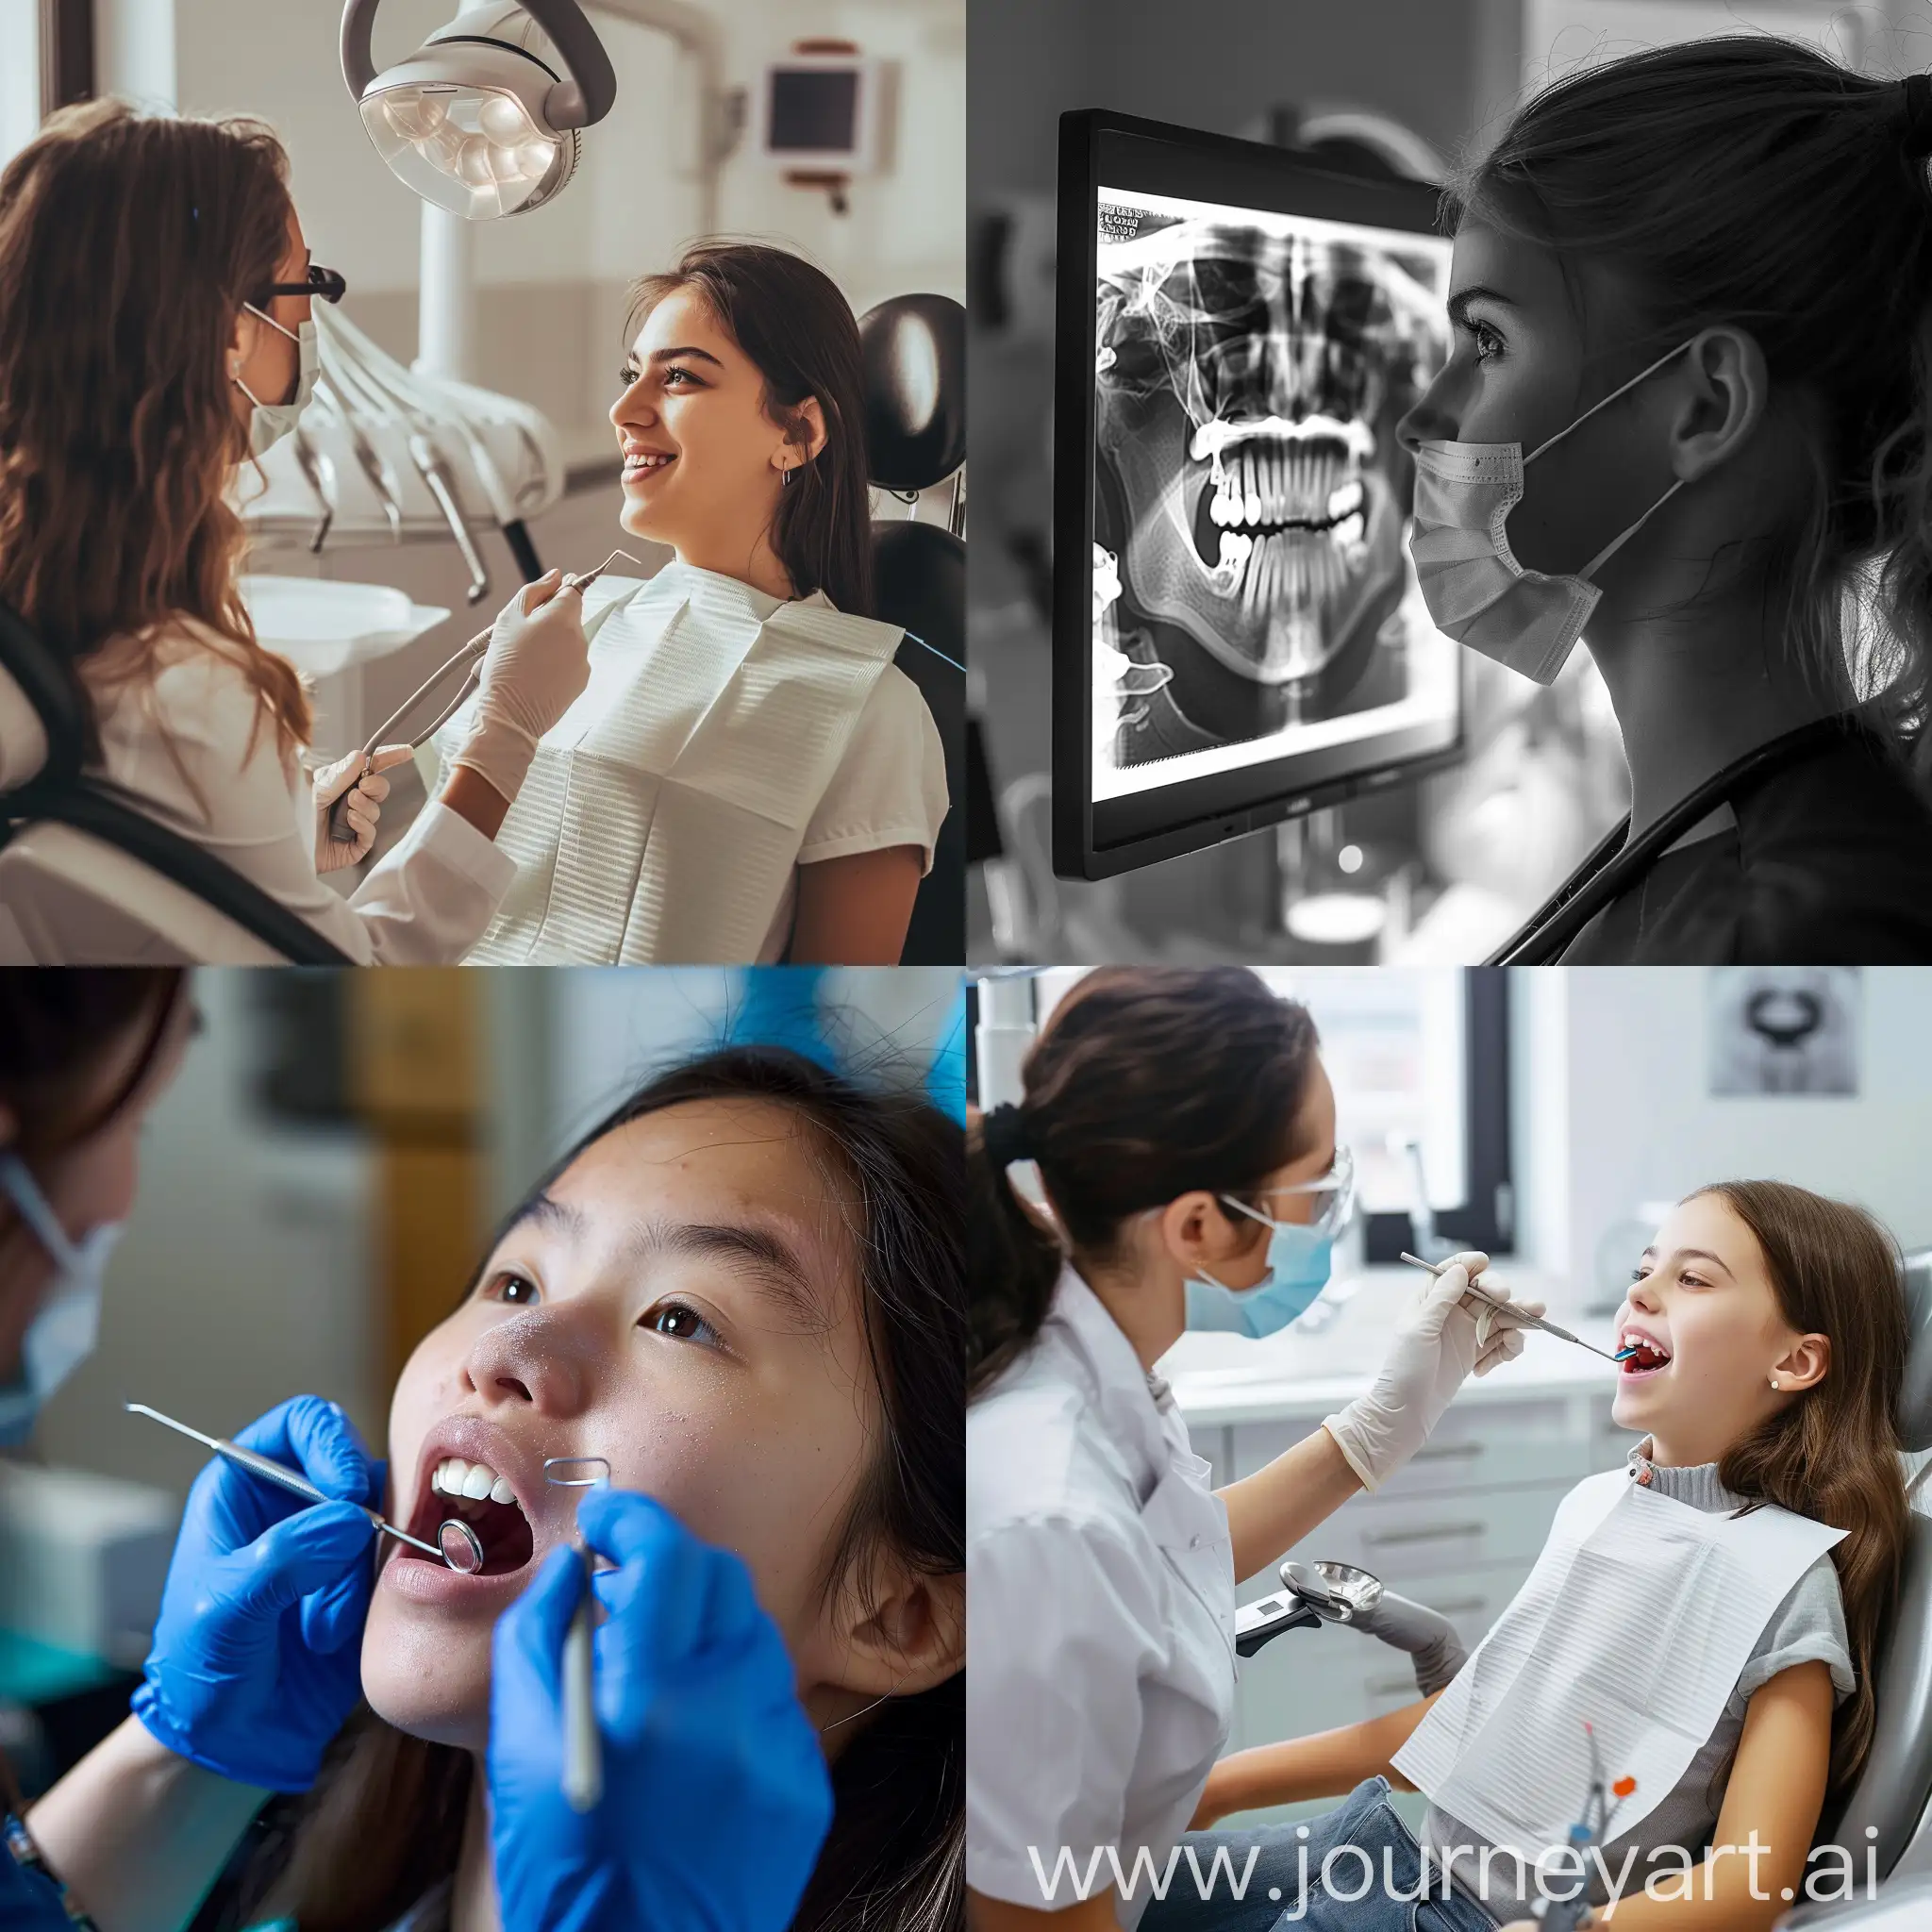 Comprehensive-Axiography-Examination-in-Dentistry-for-a-Young-Girl